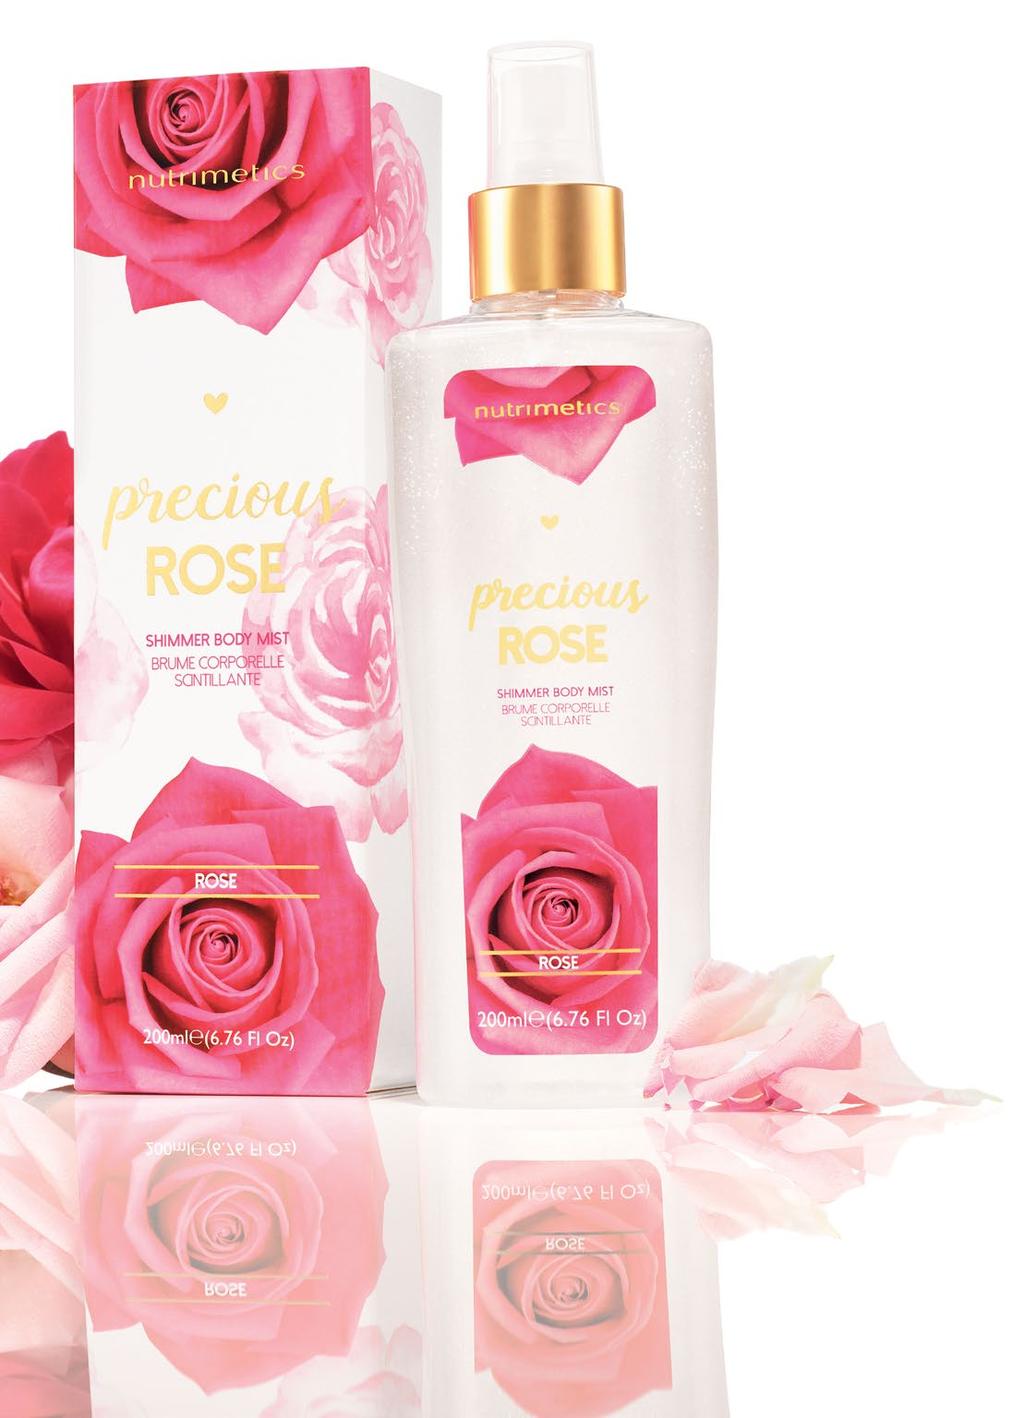 NEW Precious Rose Shimmer Body Mist is filled with the beautiful scent of Rose, together with a touch of sheer shimmer to leave your skin radiant, gorgeously glowing and irresistibly fragranced.